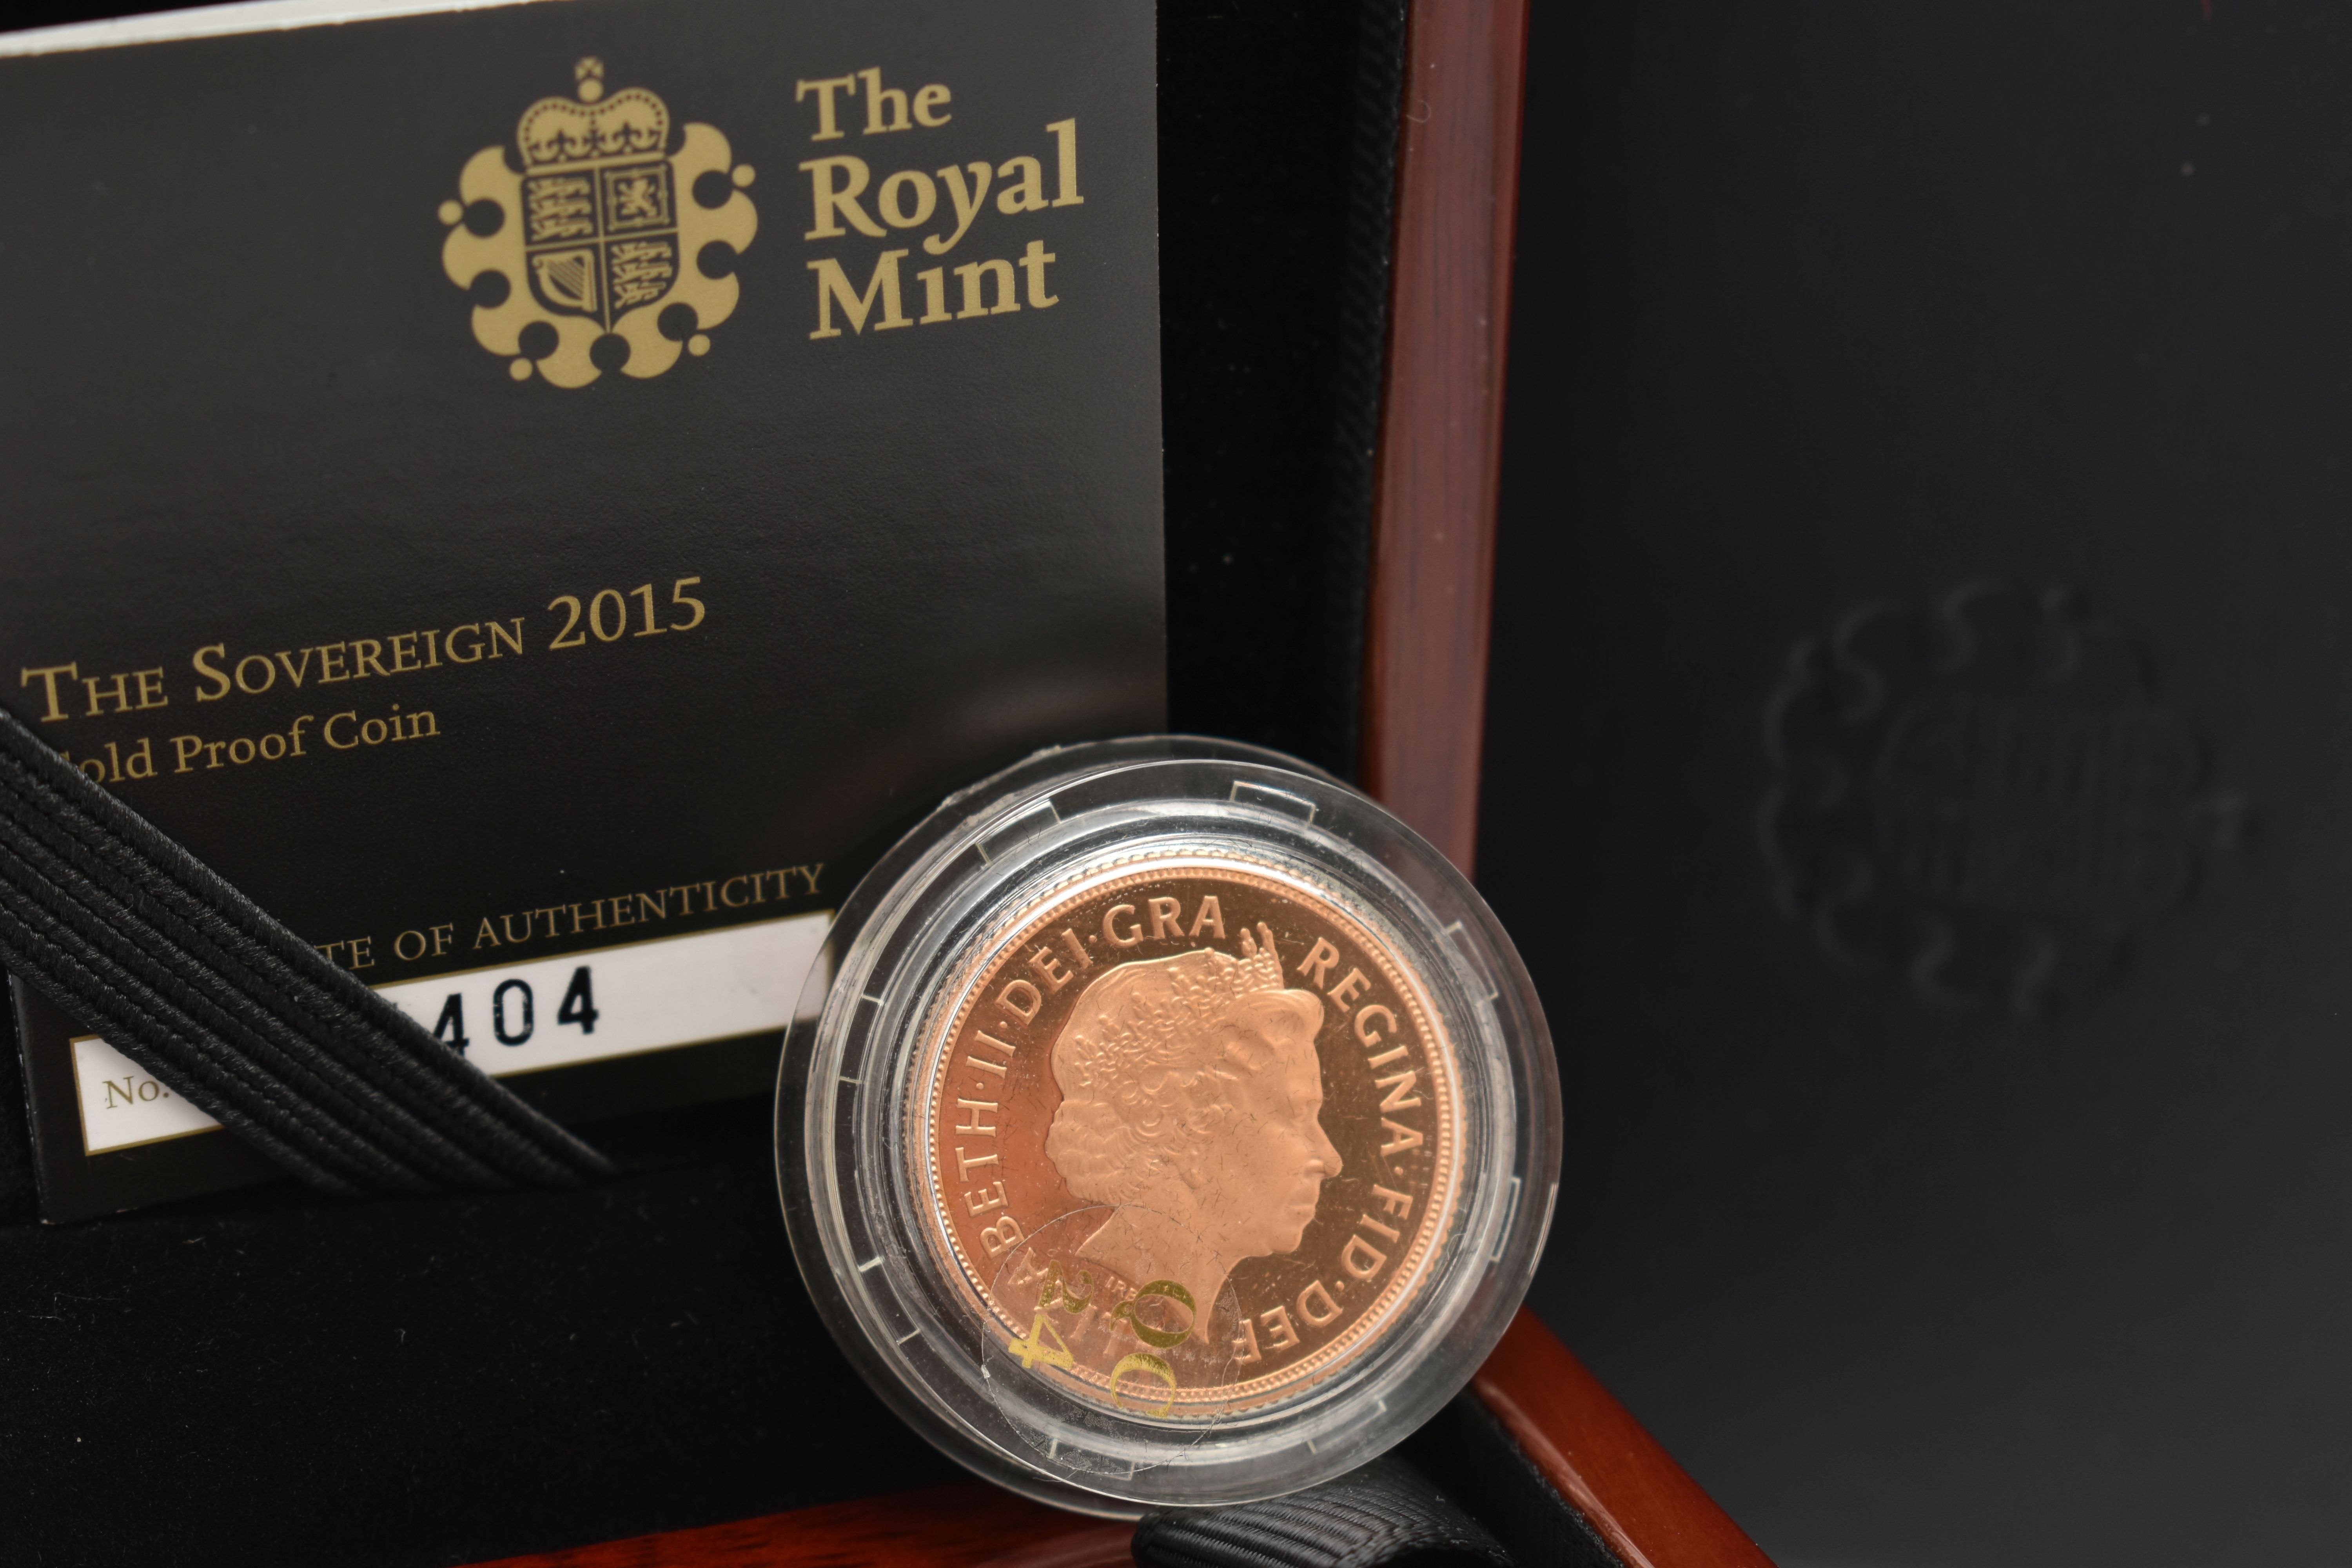 A BOXED ROYAL MINT FULL GOLD PROOF SOVEREIGN COIN 2015, .916.7 fine, 7.98 gram, 22.05mm, box and - Image 2 of 2